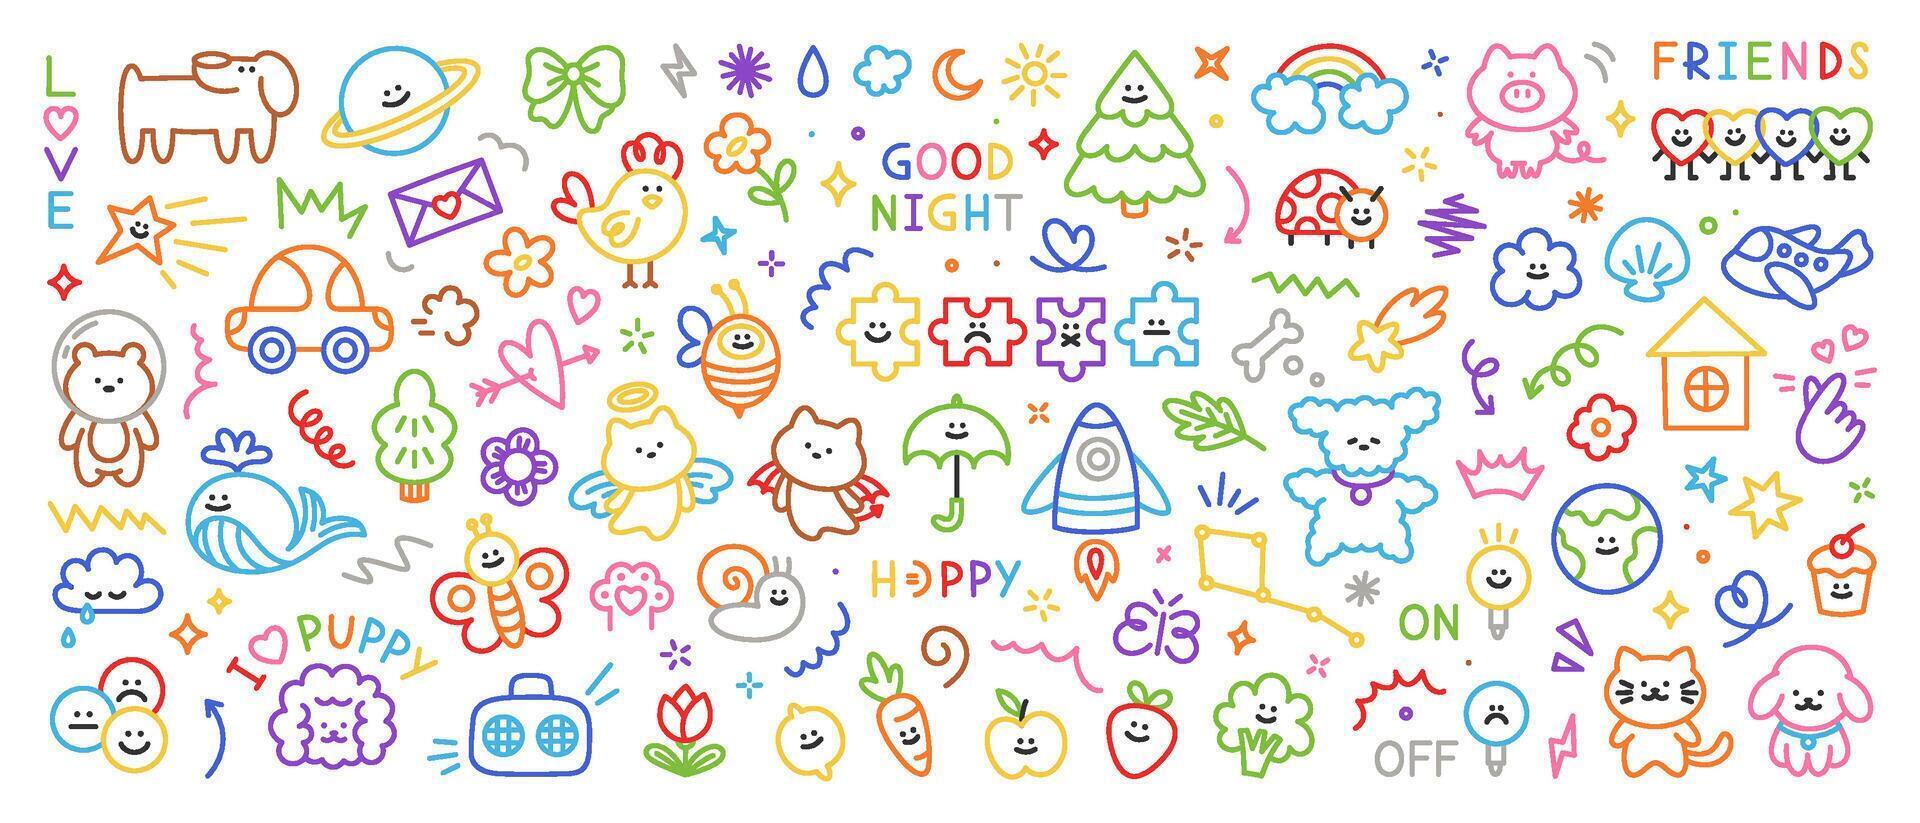 Cute colorful kid doodle icons set. Hand drawn scribble set of sun, flower, smile, heart, animal, cloud, star, rainbow, tree. Trendy sketch childish elements for stickers, patterns, banners vector